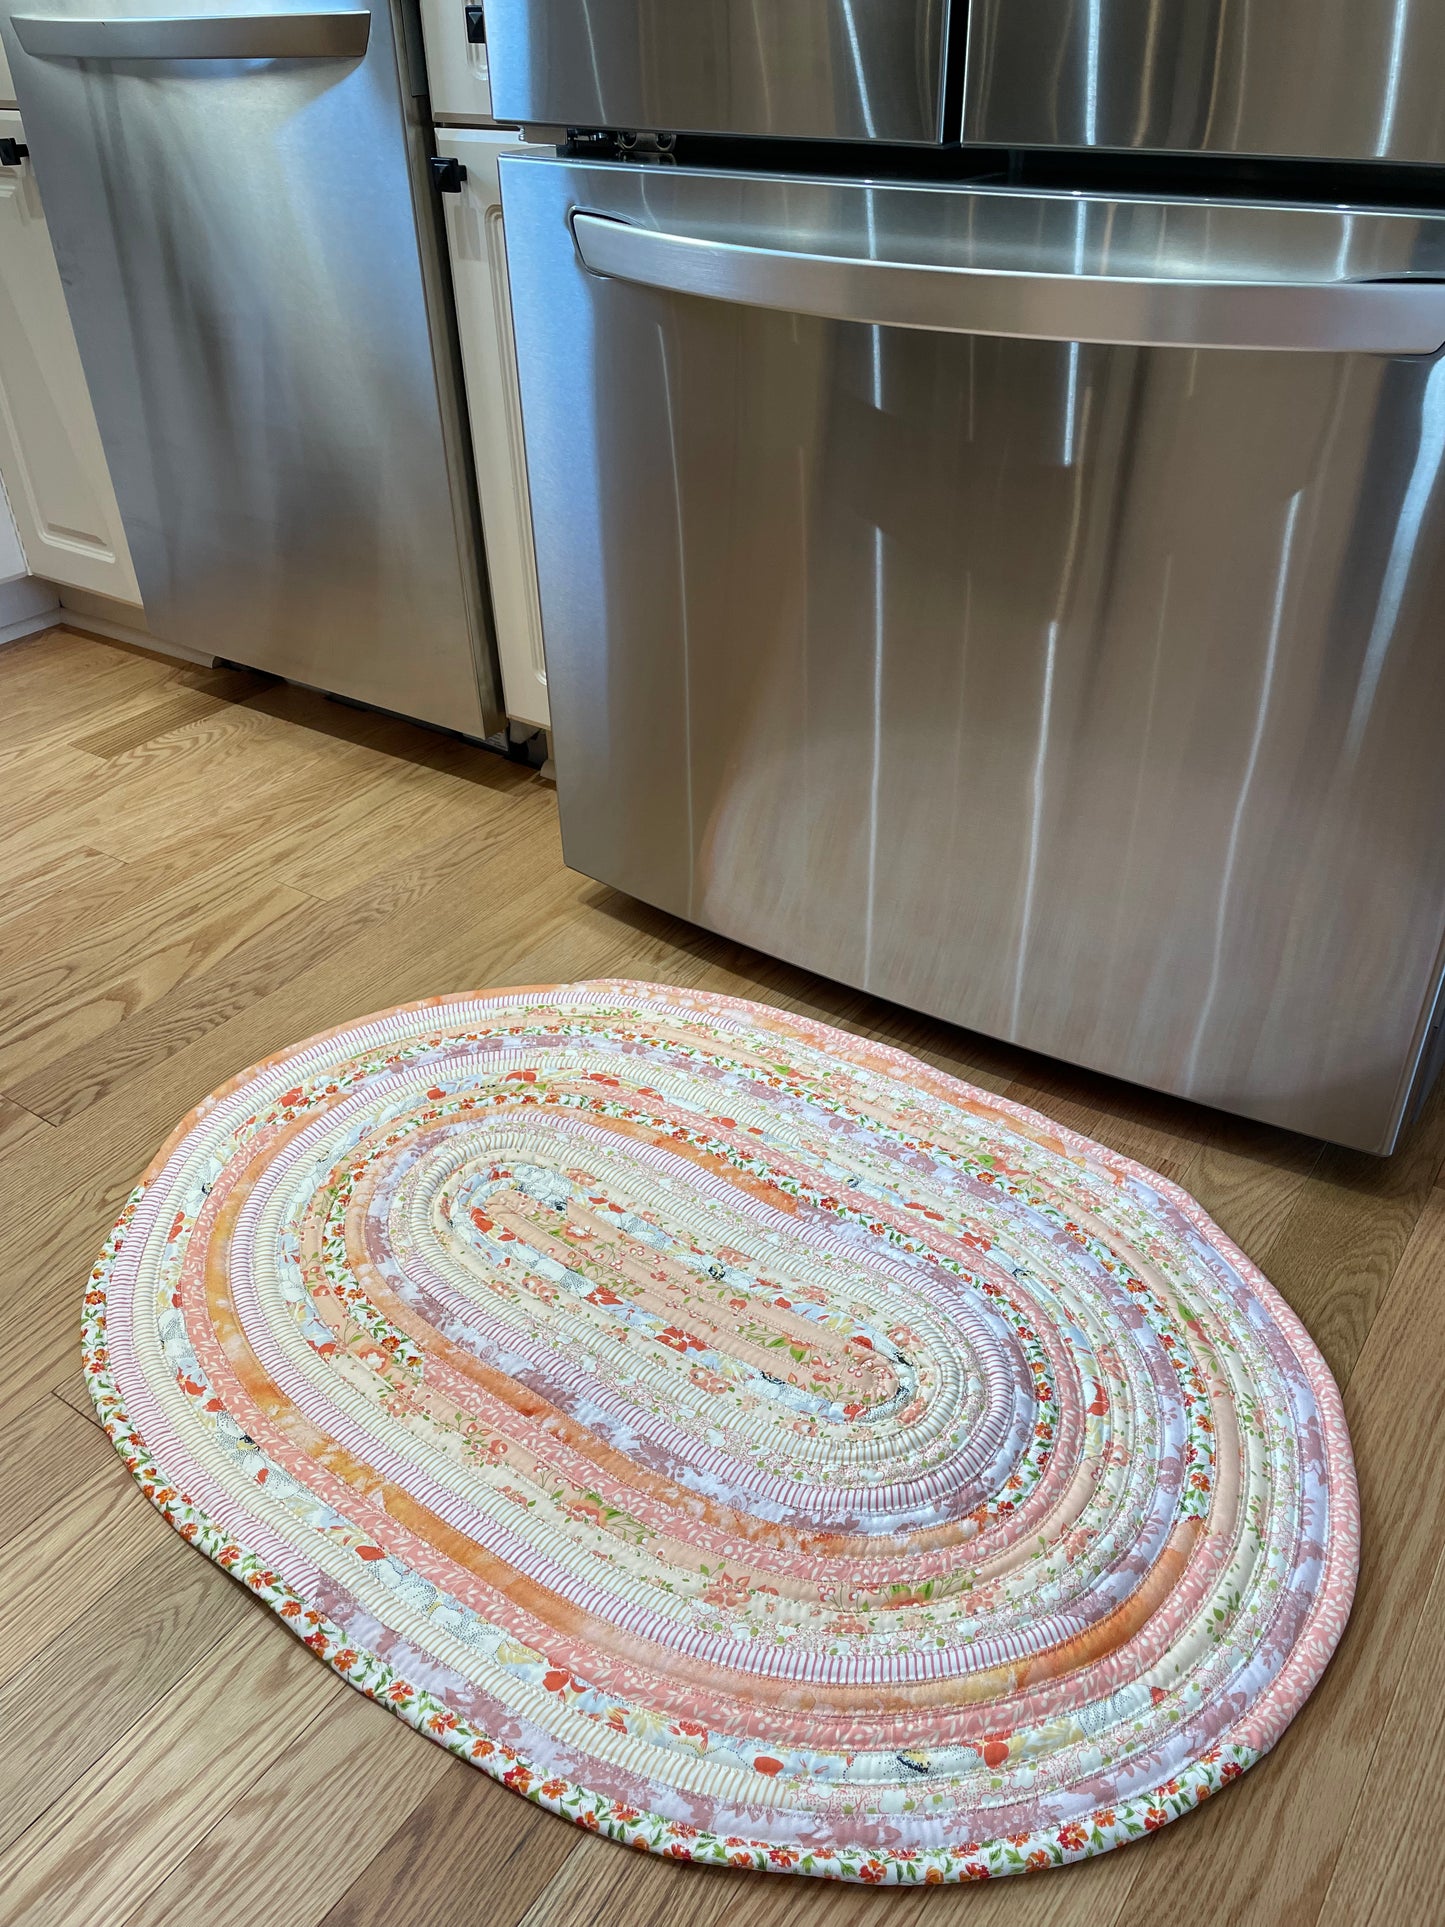 Handmade Canadian Cotton Kitchen Mat - Sink Rug - Washable and Durable and Pretty!